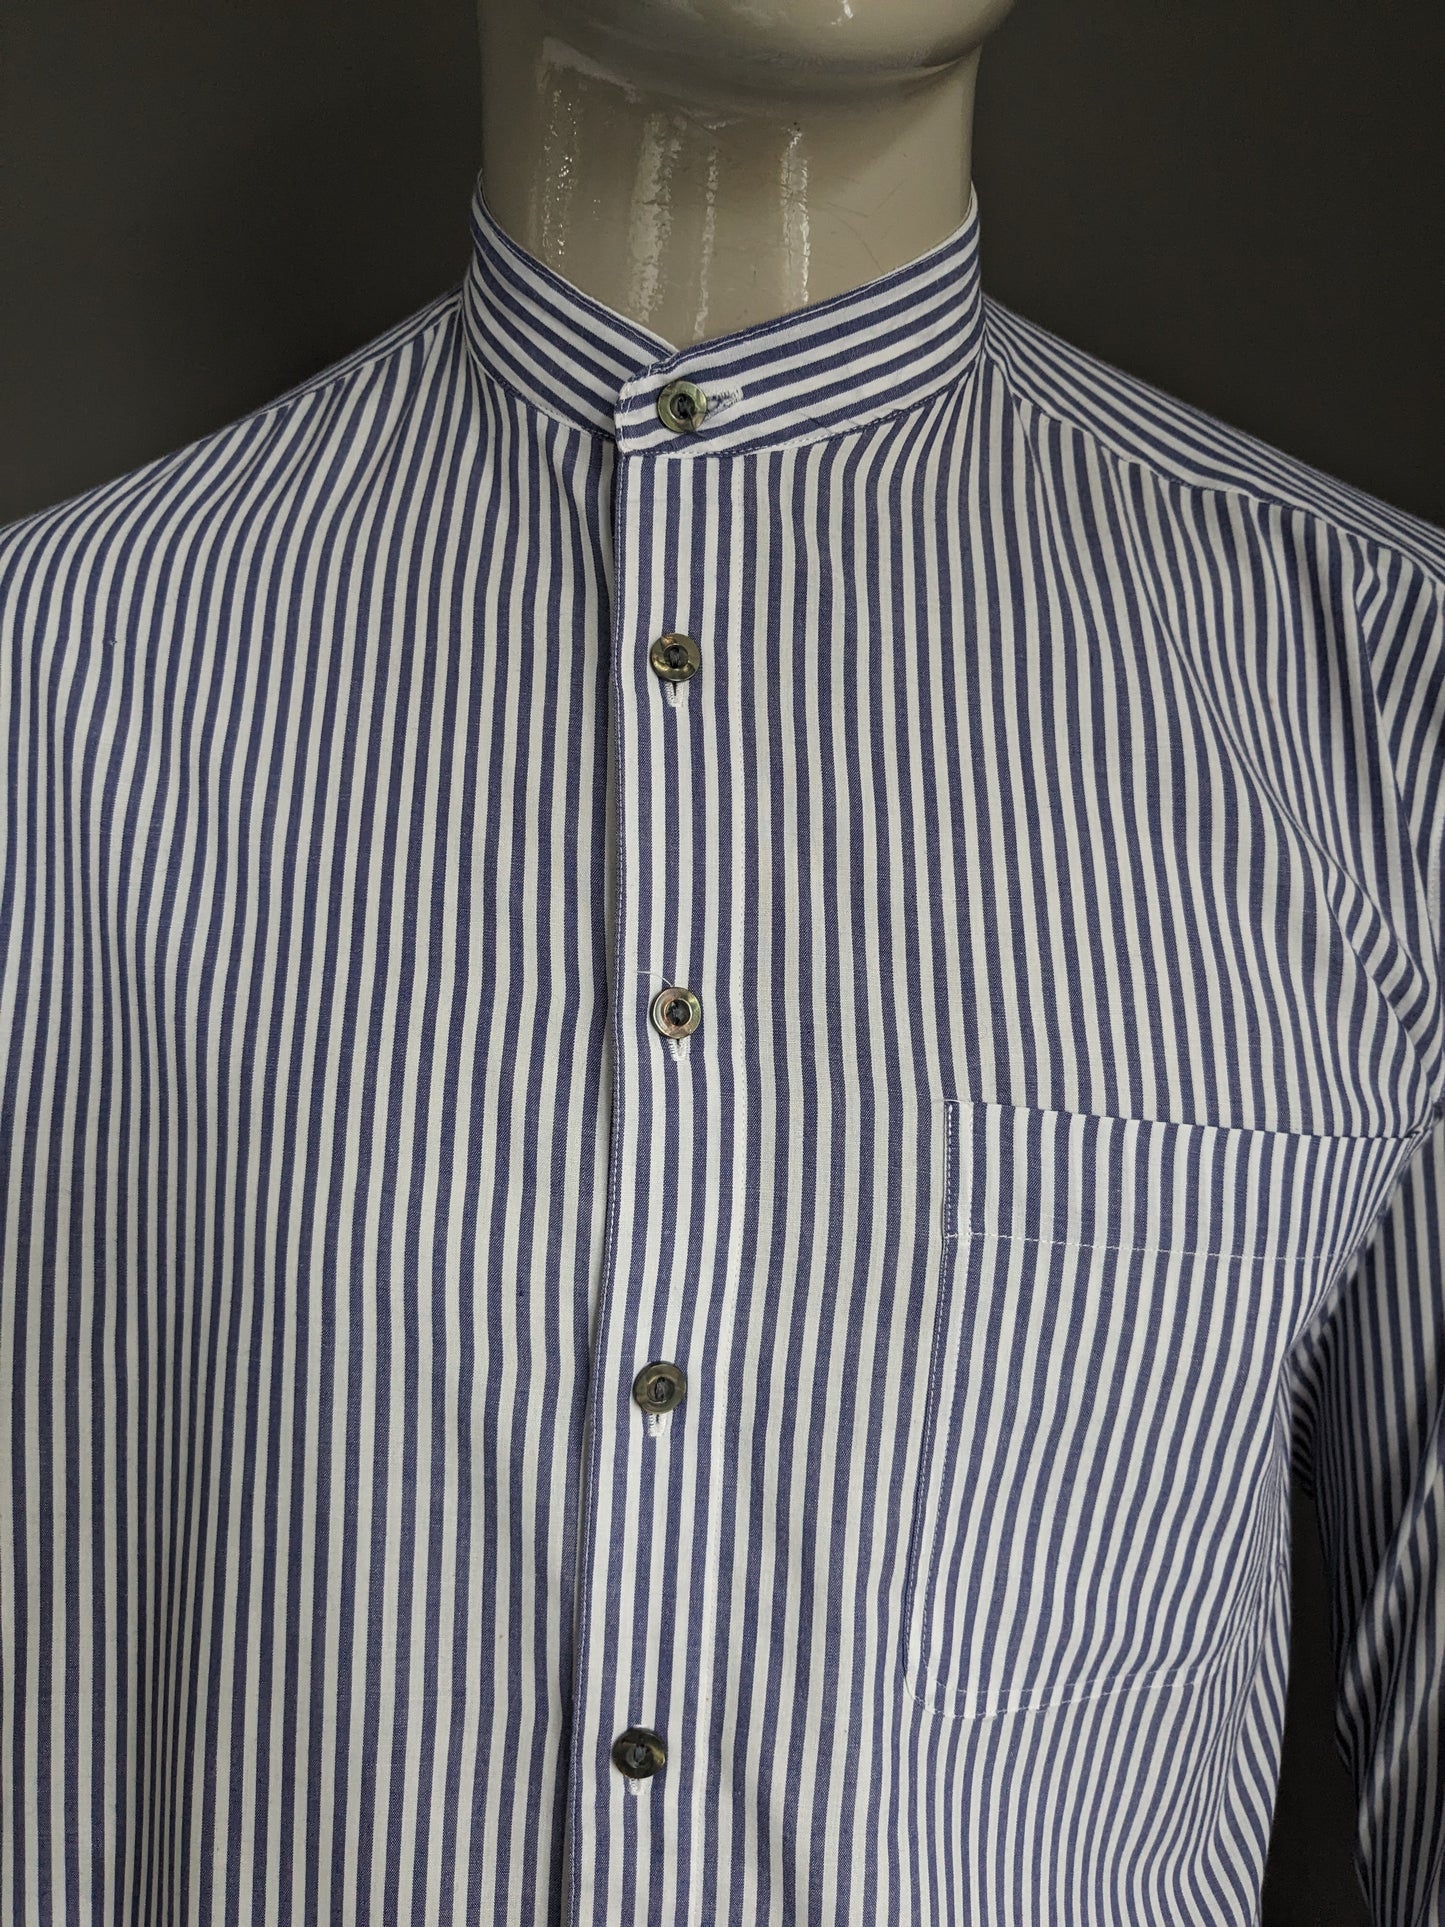 Vintage Kings Pride shirt with Mao / Farmers / Standing Collar. Blue white striped. Size L.